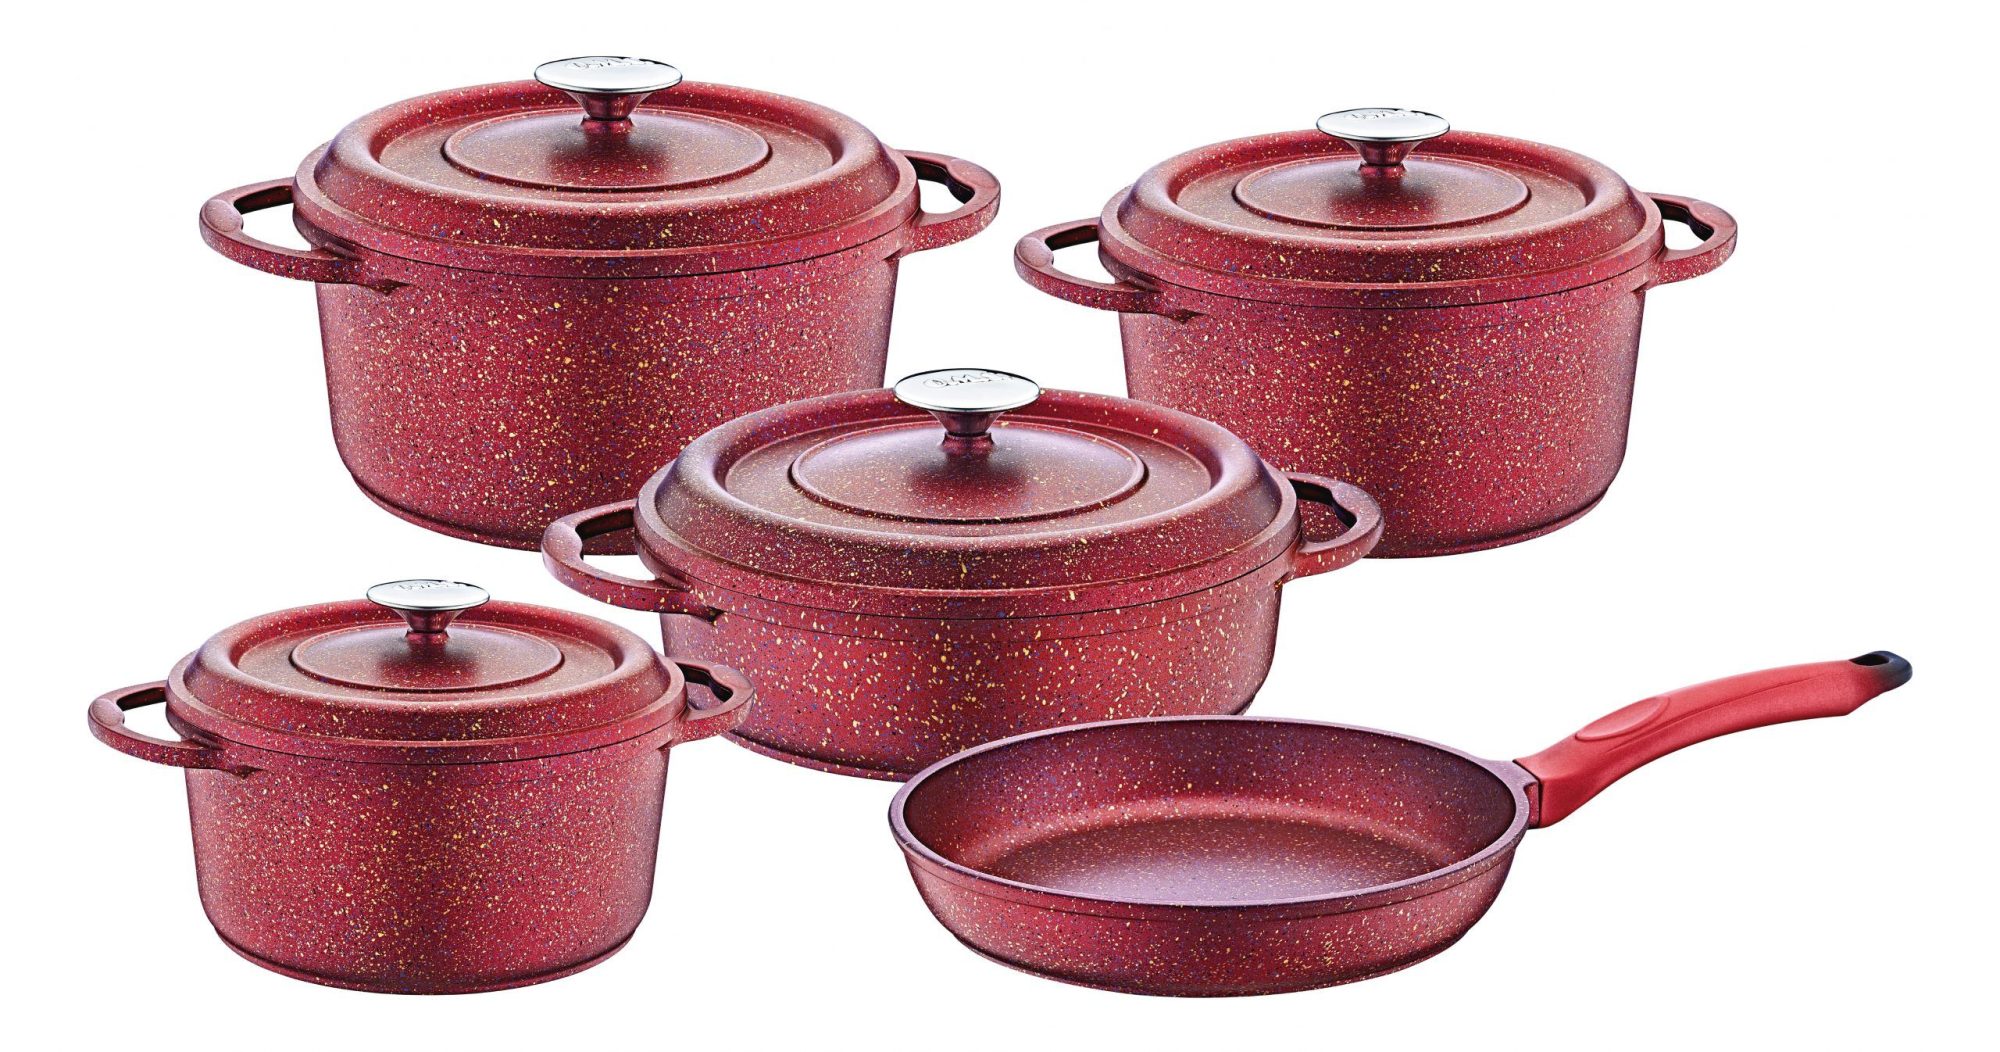 OMS 9 Pcs Ocaliptus Oven Safe Die Cast Cookware Set with Granite Cover - Made in Turkey